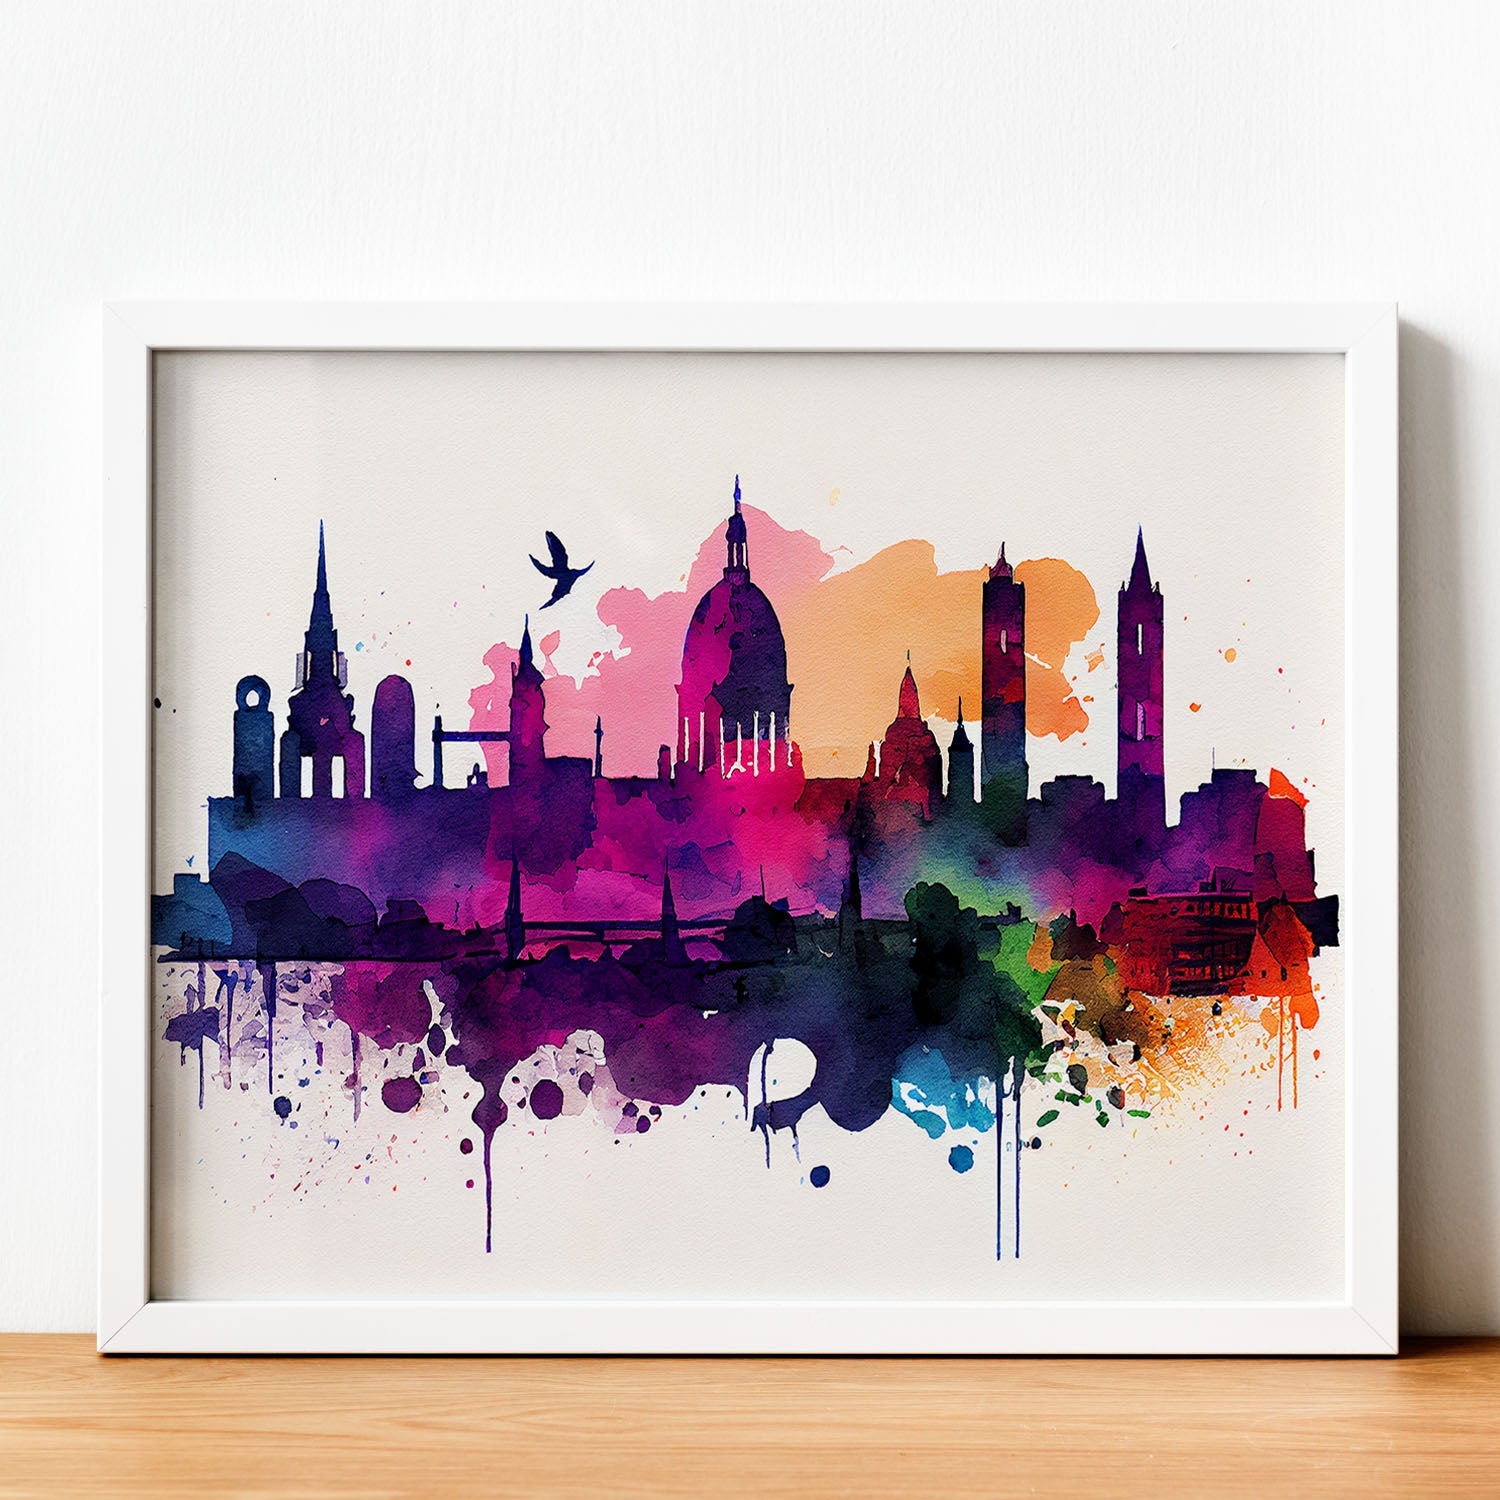 Nacnic watercolor of a skyline of the city of Dublin. Aesthetic Wall Art Prints for Bedroom or Living Room Design.-Artwork-Nacnic-A4-Sin Marco-Nacnic Estudio SL